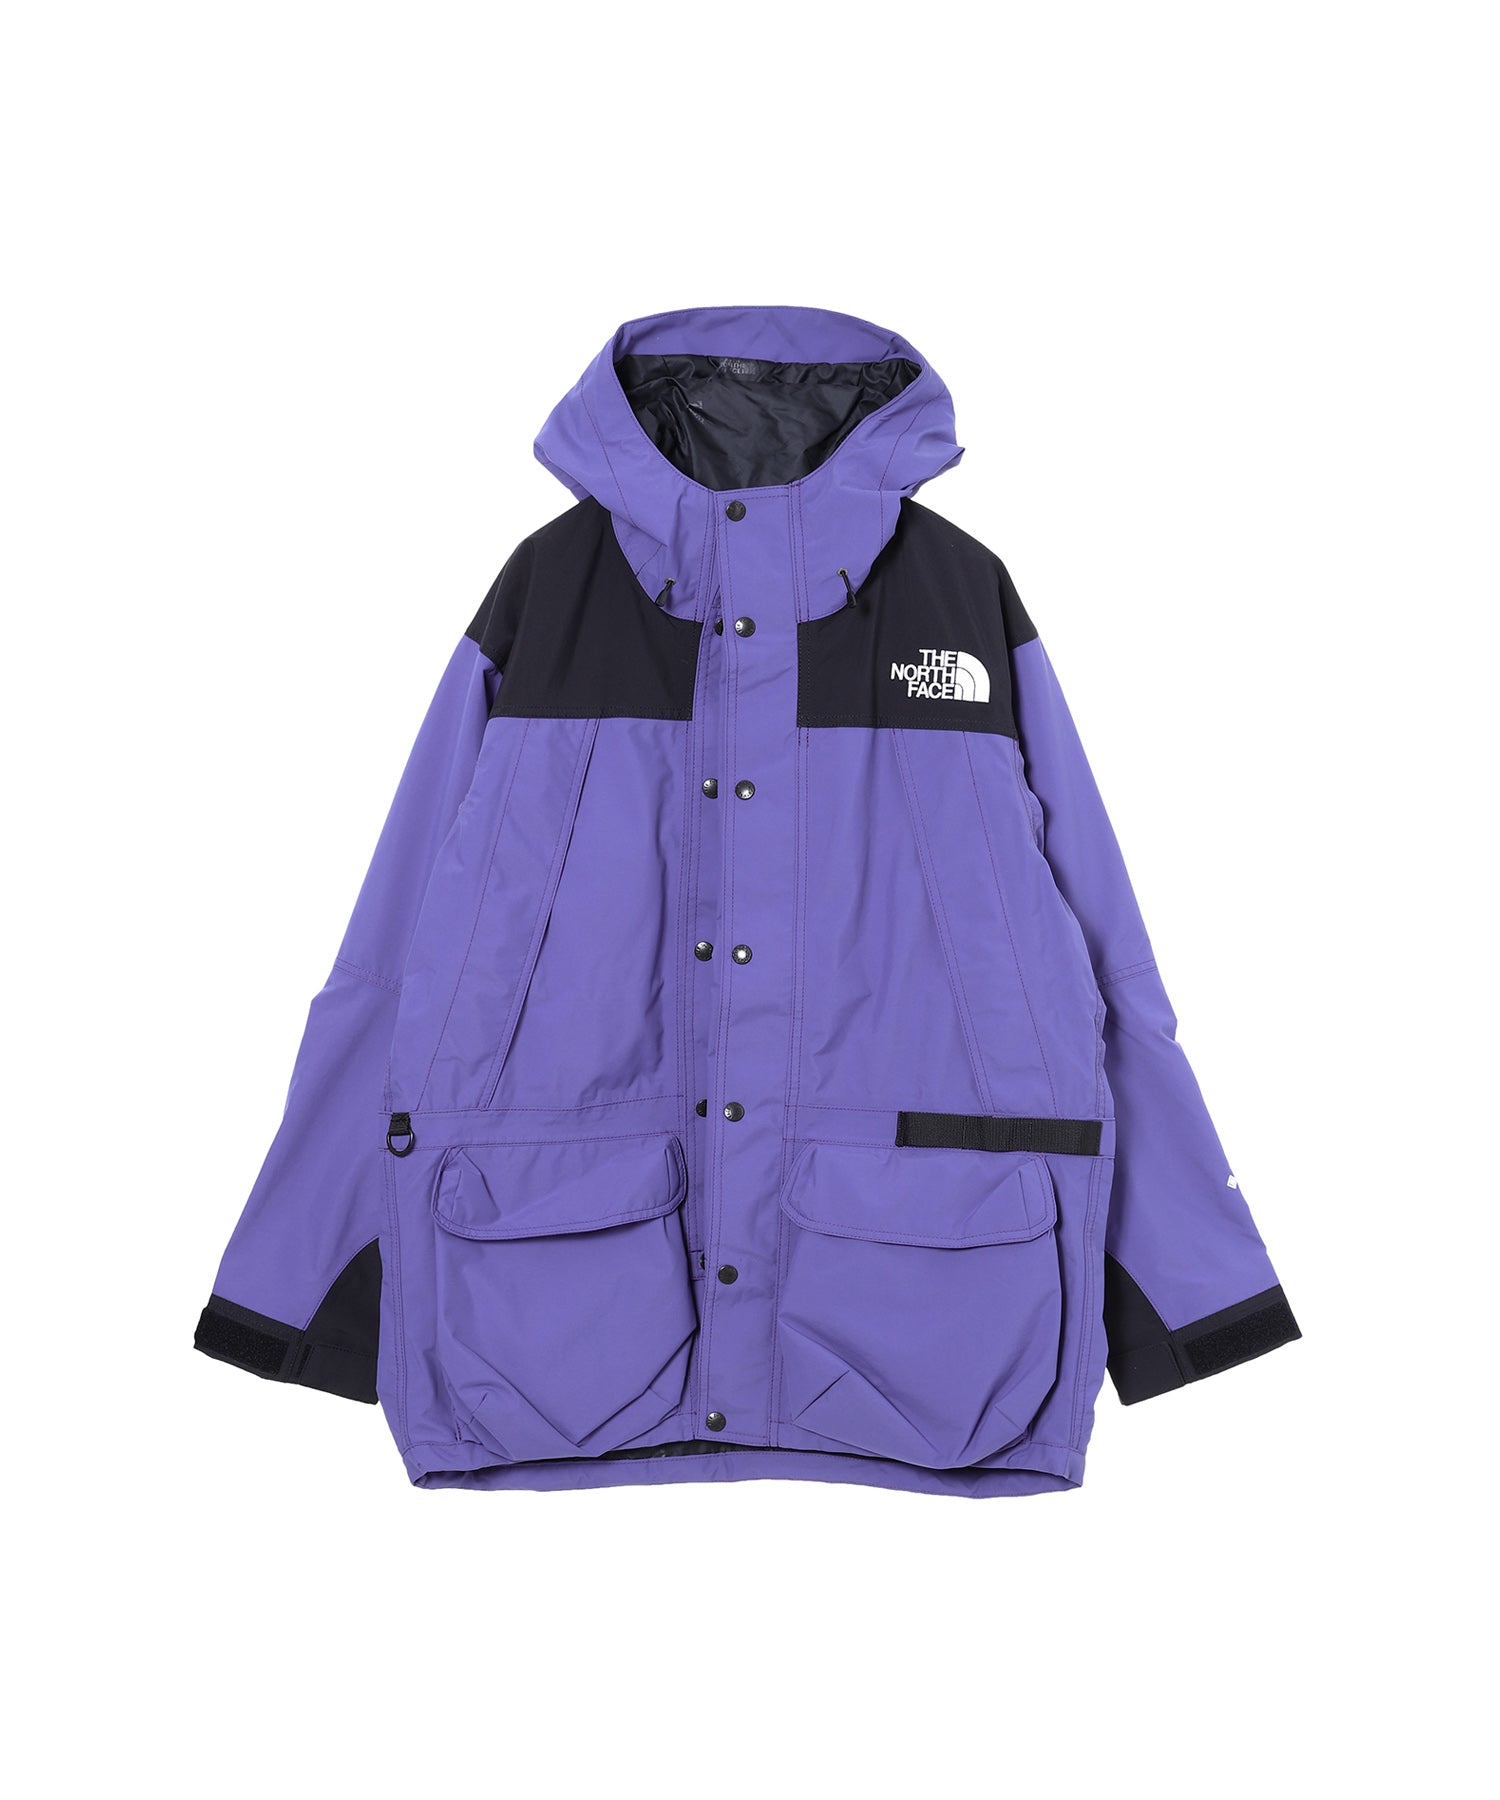 CR Storage Jacket - THE NORTH FACE (ザ・ノース・フェイス) - outer 